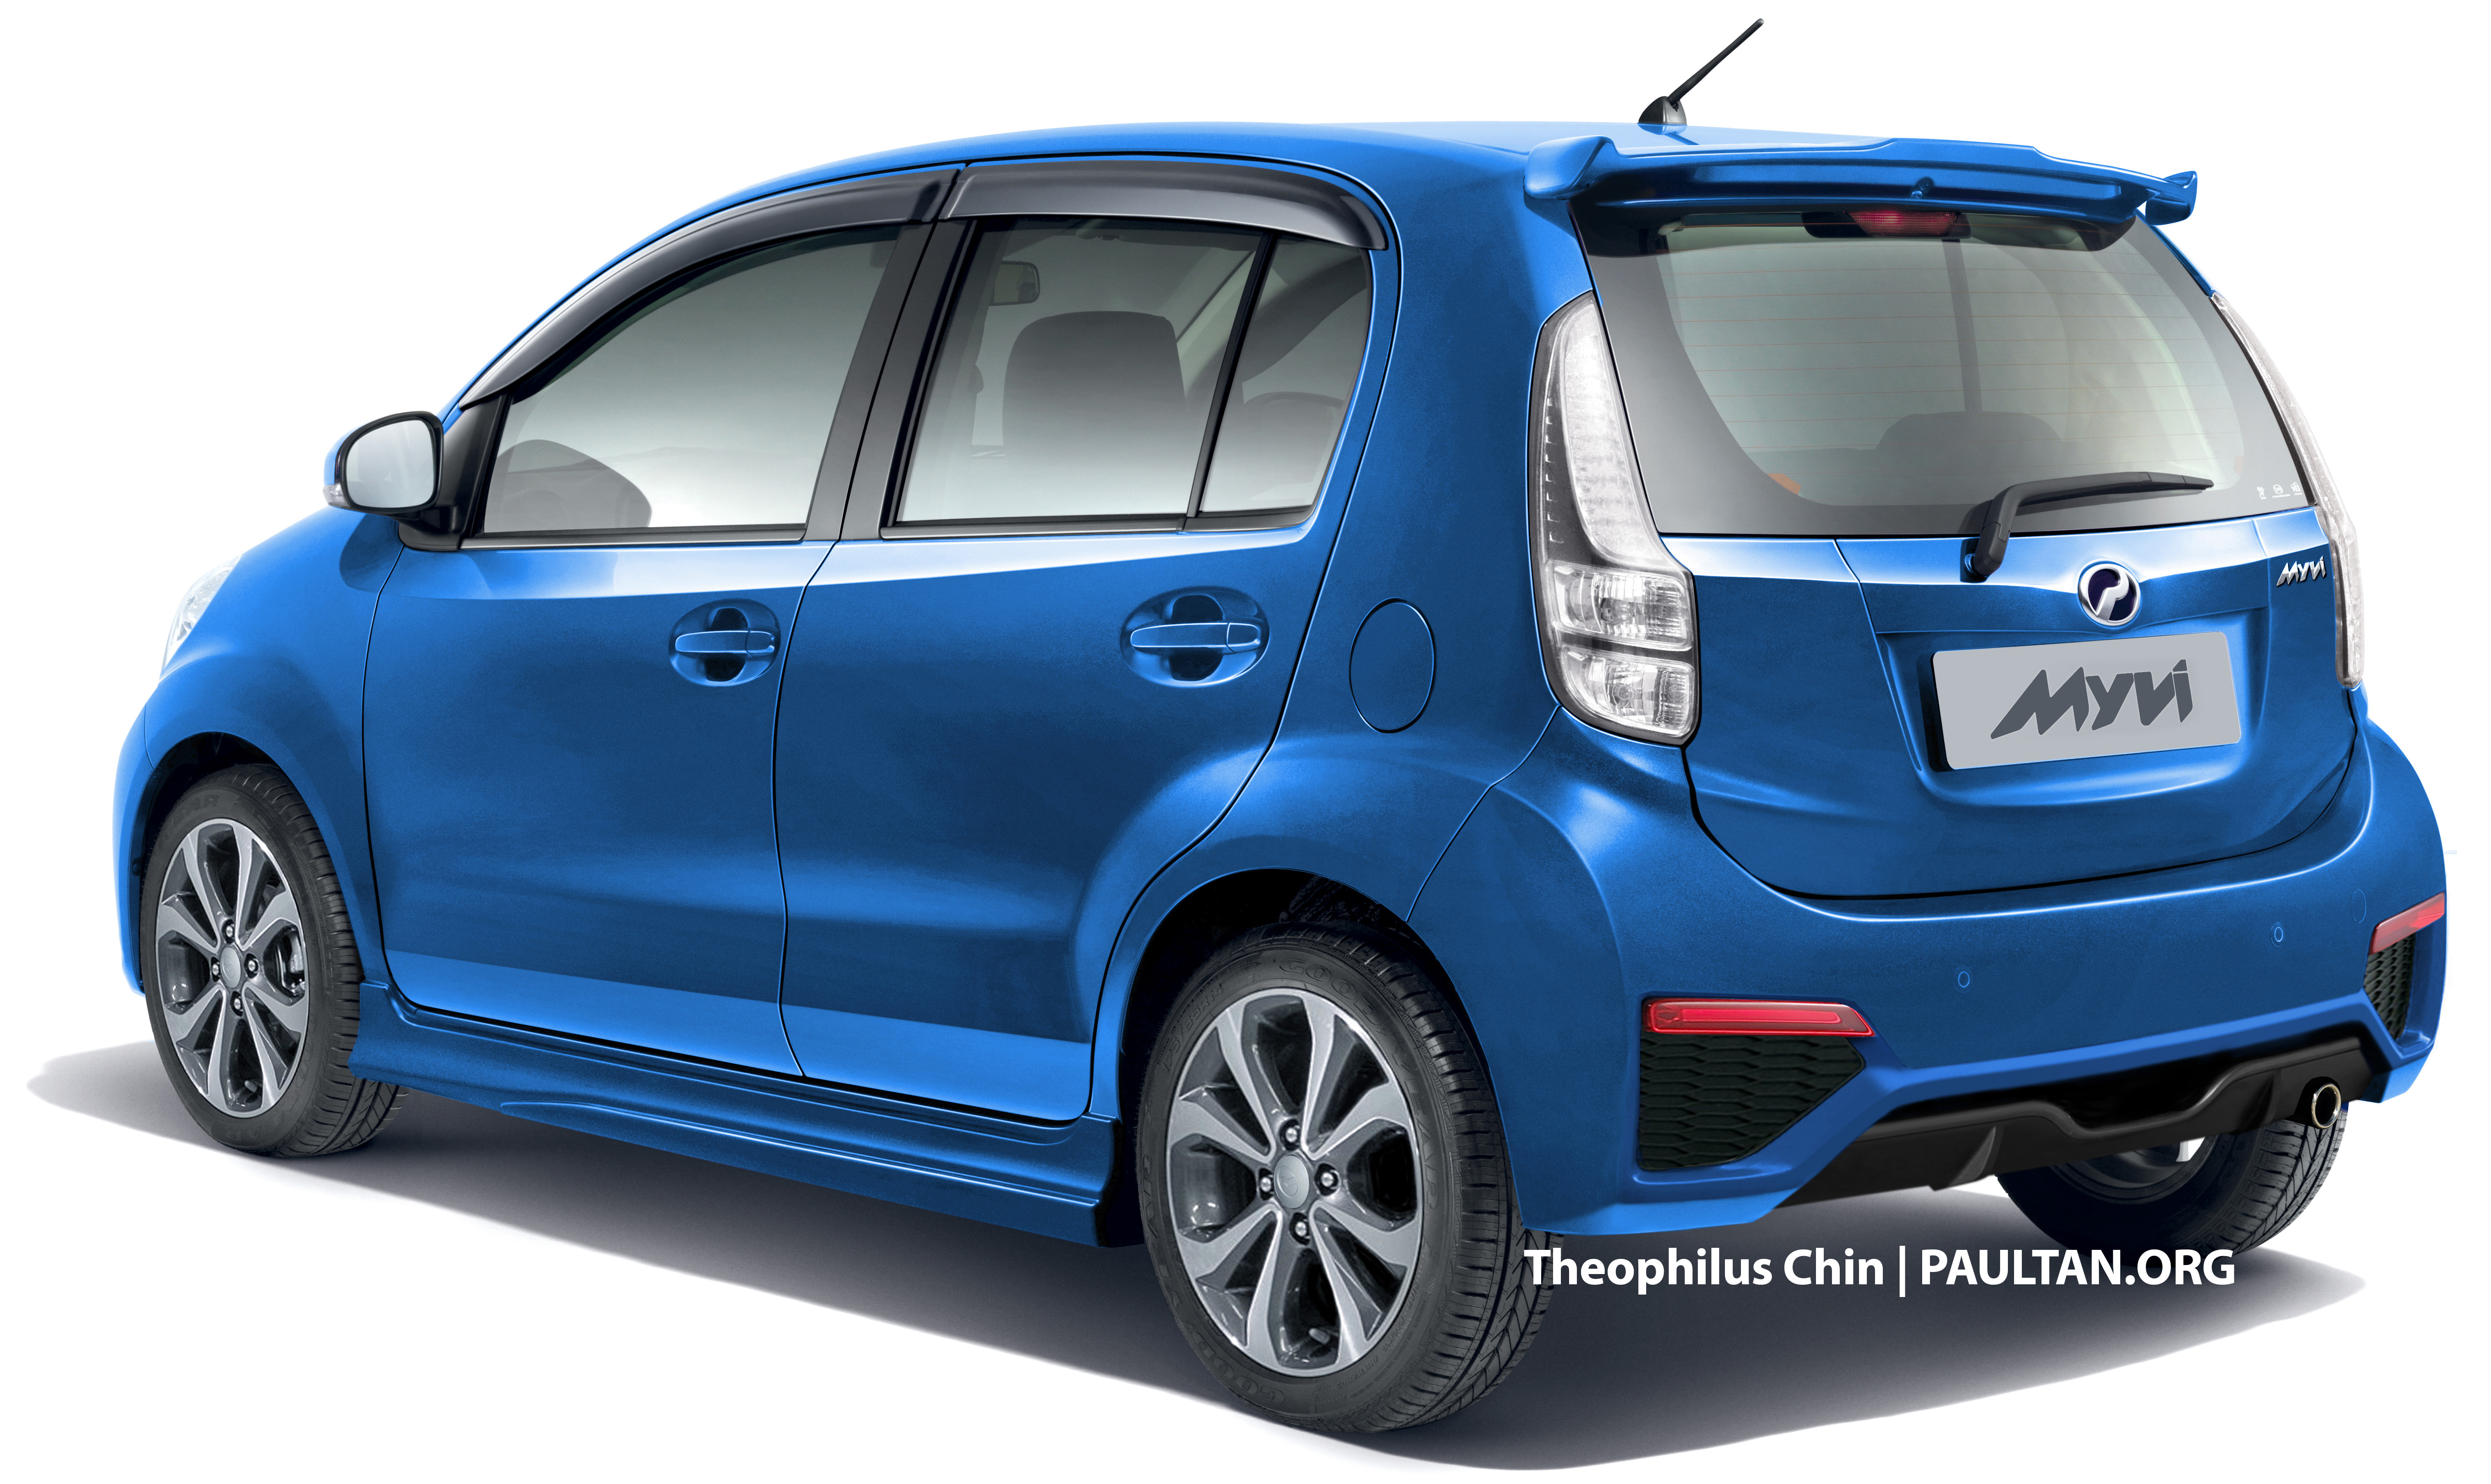 Perodua Myvi facelift rendered with new rear view